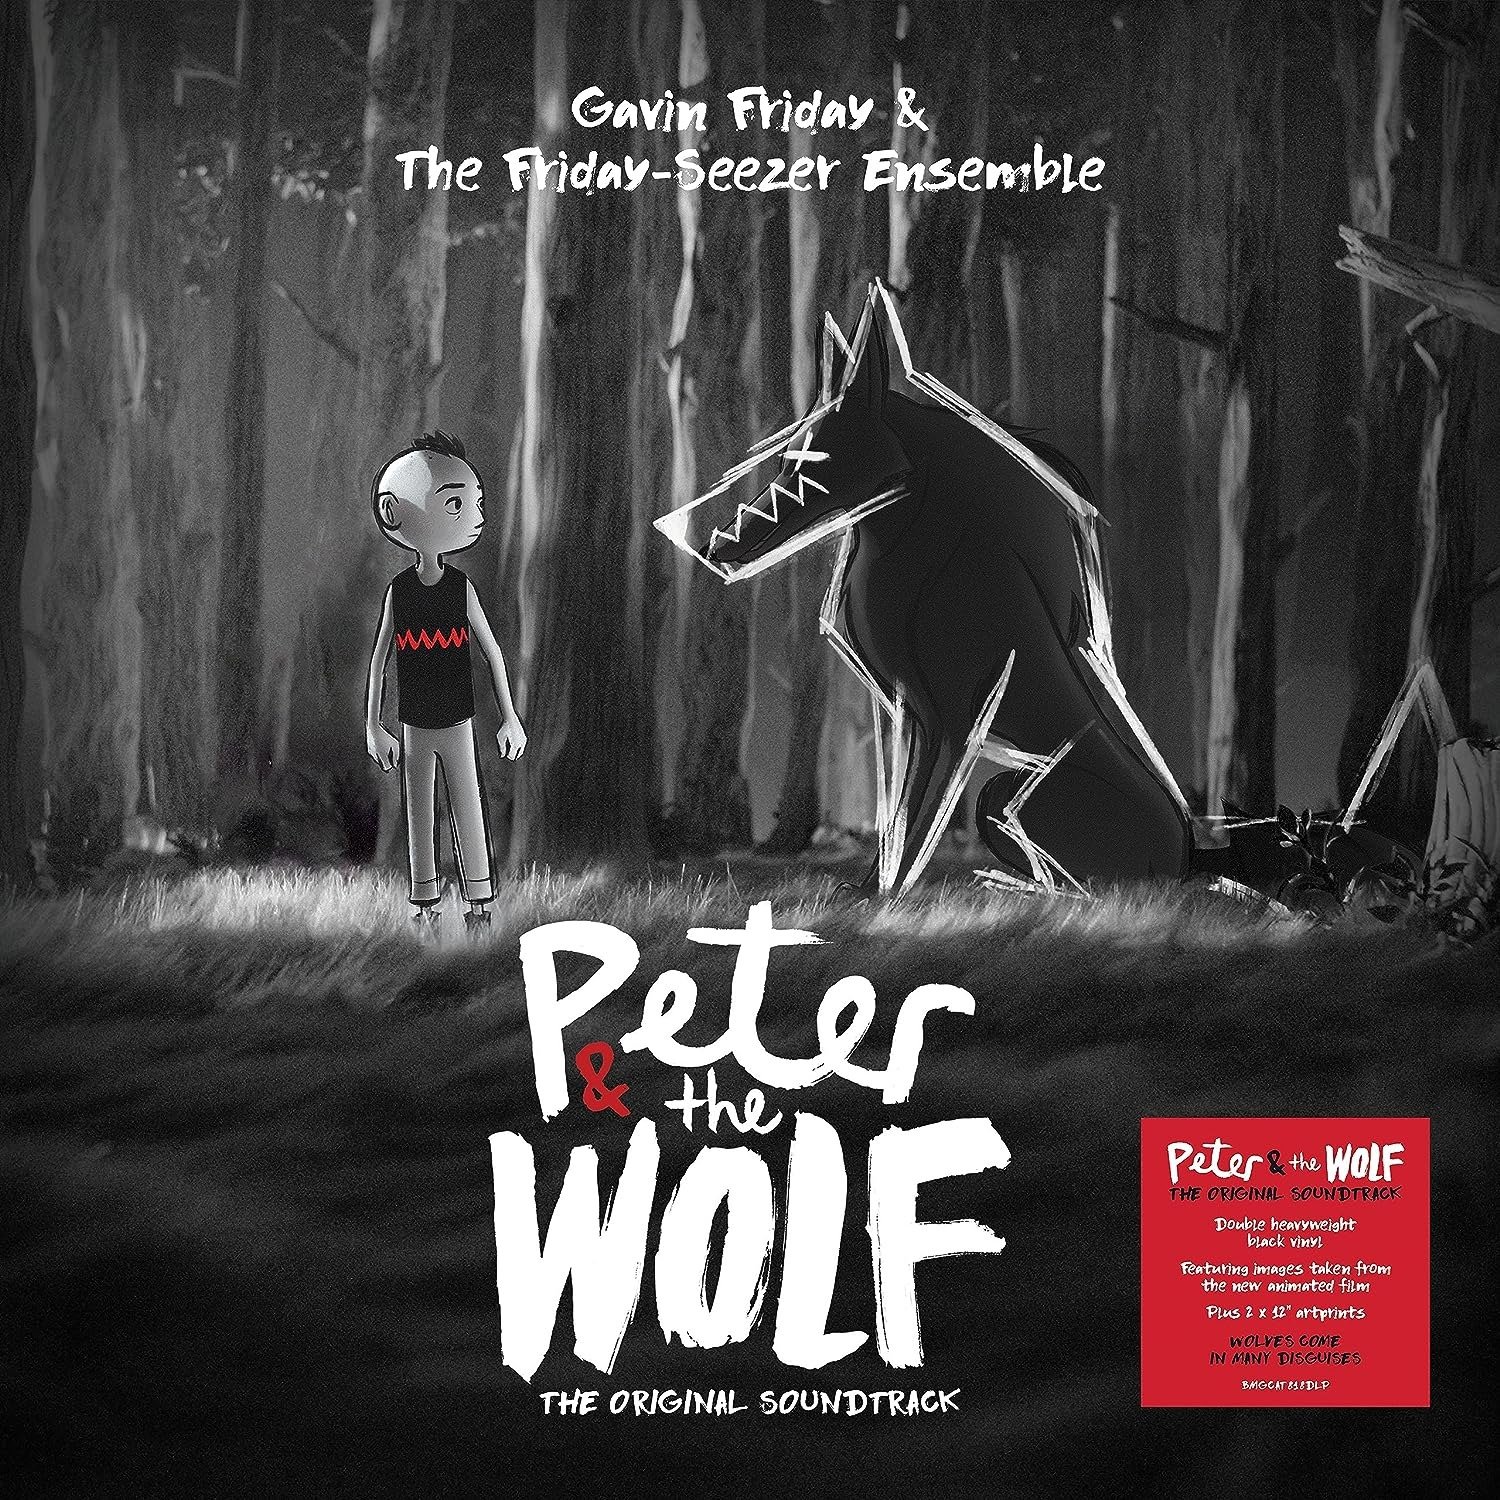 CD Shop - FRIDAY, GAVIN  & THE FRIDAY-SEEZER ENSEMBLE PETER AND THE WOLF (ORIGINAL SOUNDTRACK)